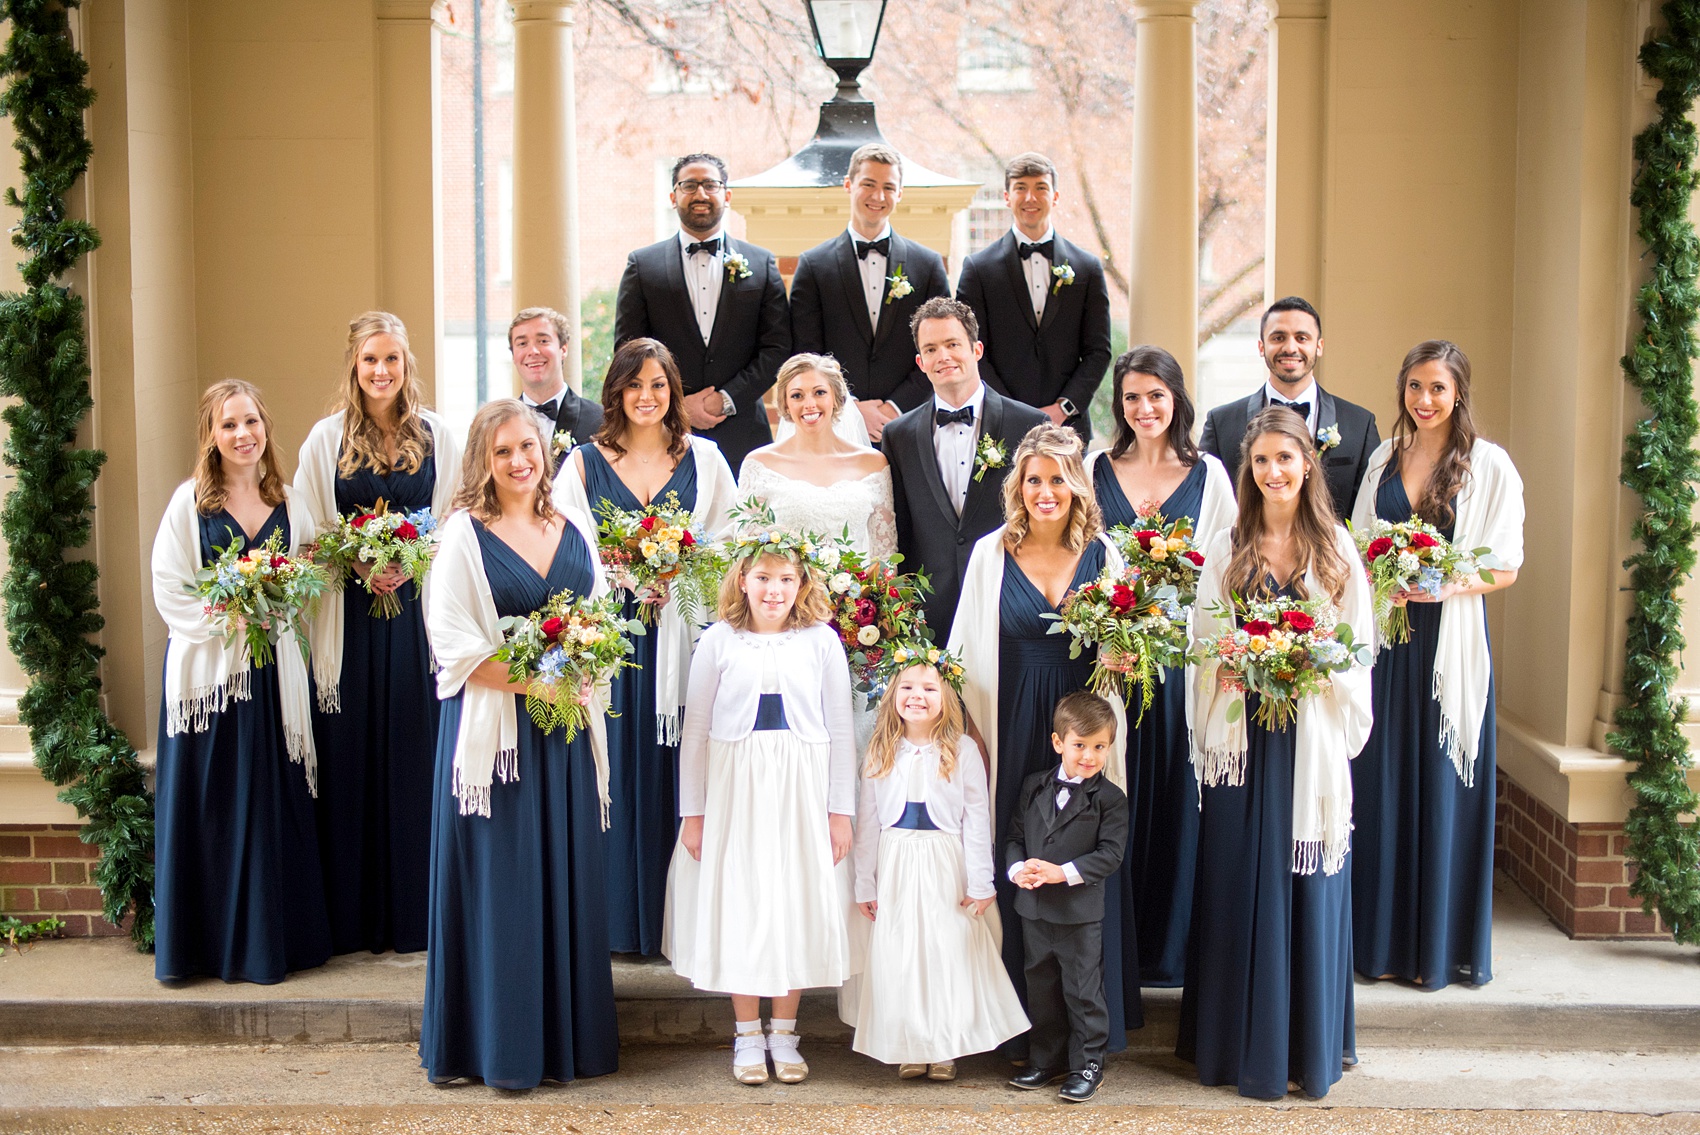 Beautiful wedding photos at The Carolina Inn at Chapel Hill, North Carolina by Mikkel Paige Photography. Photo of the bridesmaids in navy blue gowns with winter colorful bouquets and white shawls and groomsmen in black tuxedos. Click through to see the rest of this gorgeous winter wedding! #thecarolinainn #snowywedding